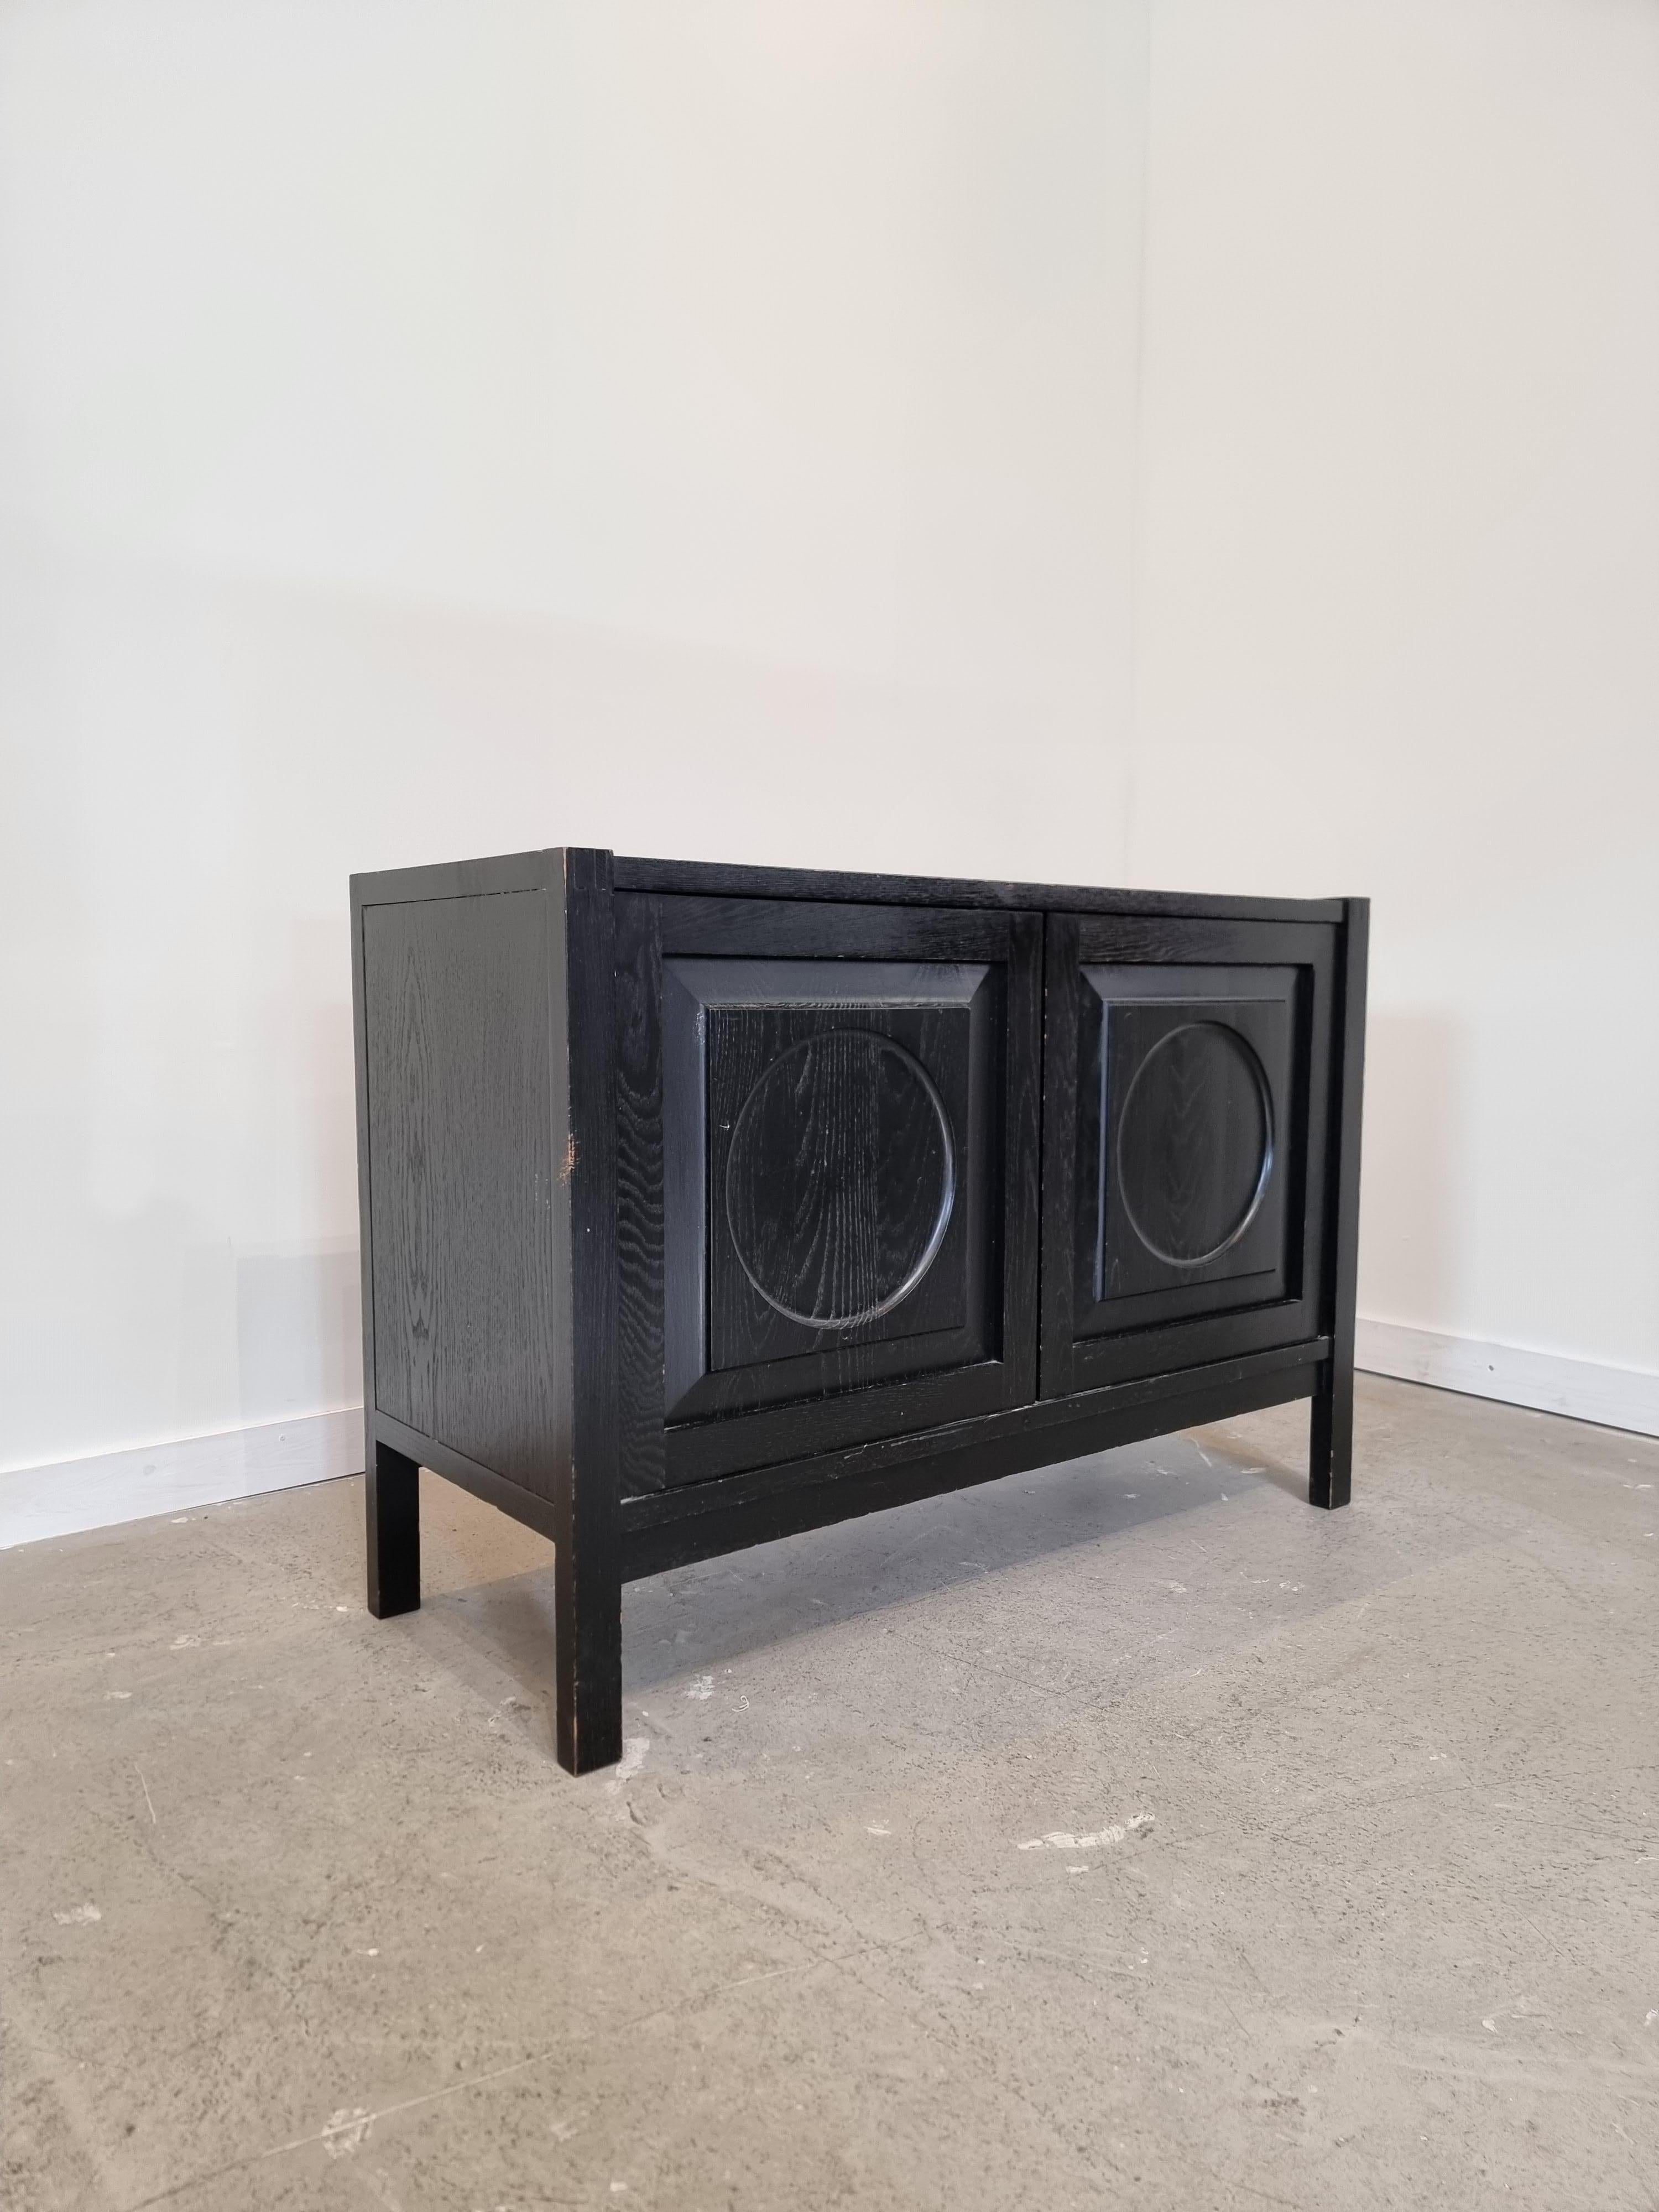 Black brutalist sideboard in very nice condition with amazing and original patina on the wood.

Made in Belgium 1970s.

The sideboard/ cabinet has two doors made of massive Black stained oak, each with a three-dimensional pattern. Visibale